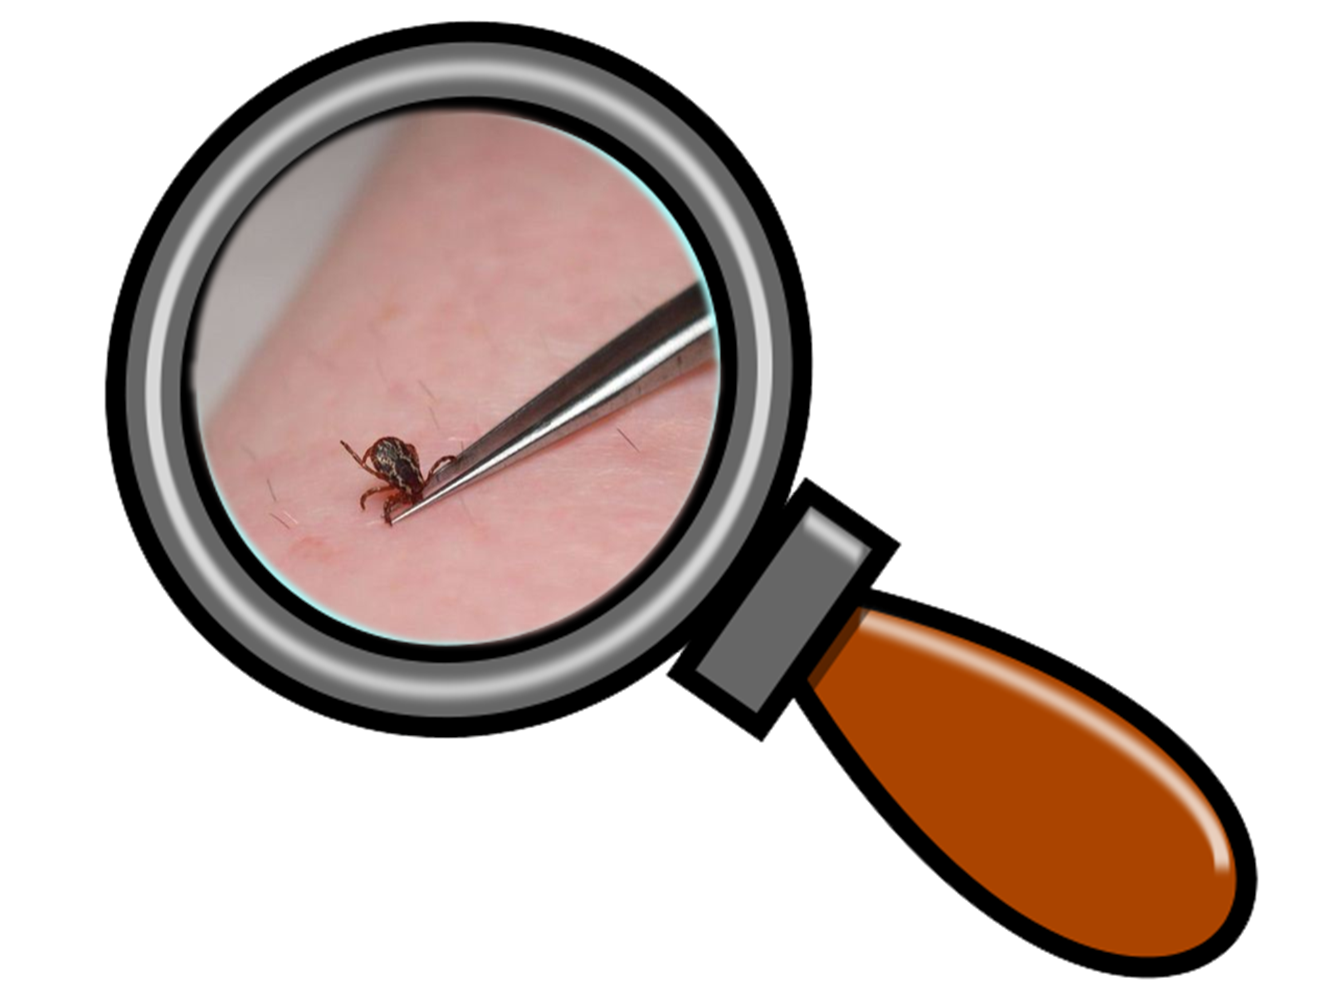 scientist clipart magnifying glass